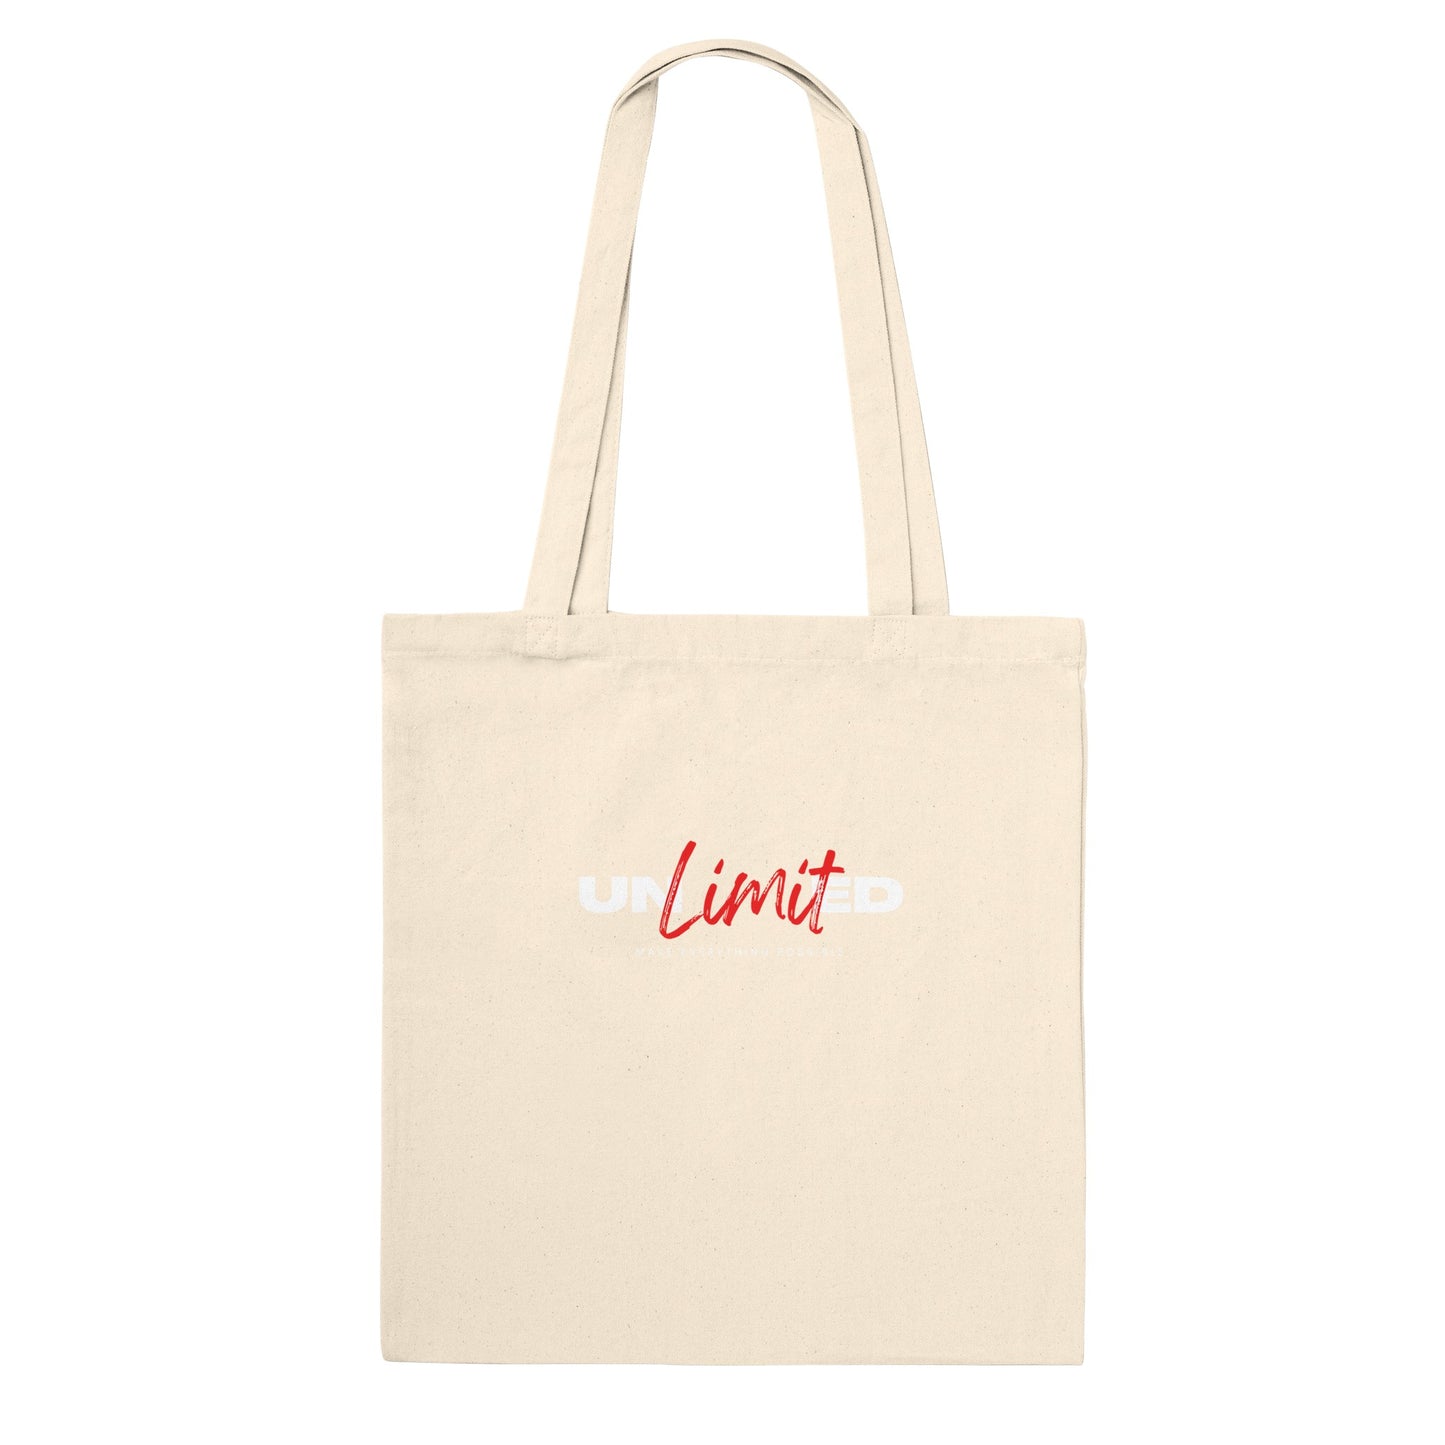 Unlimited: Make Everything Possible - Classic Tote Bag